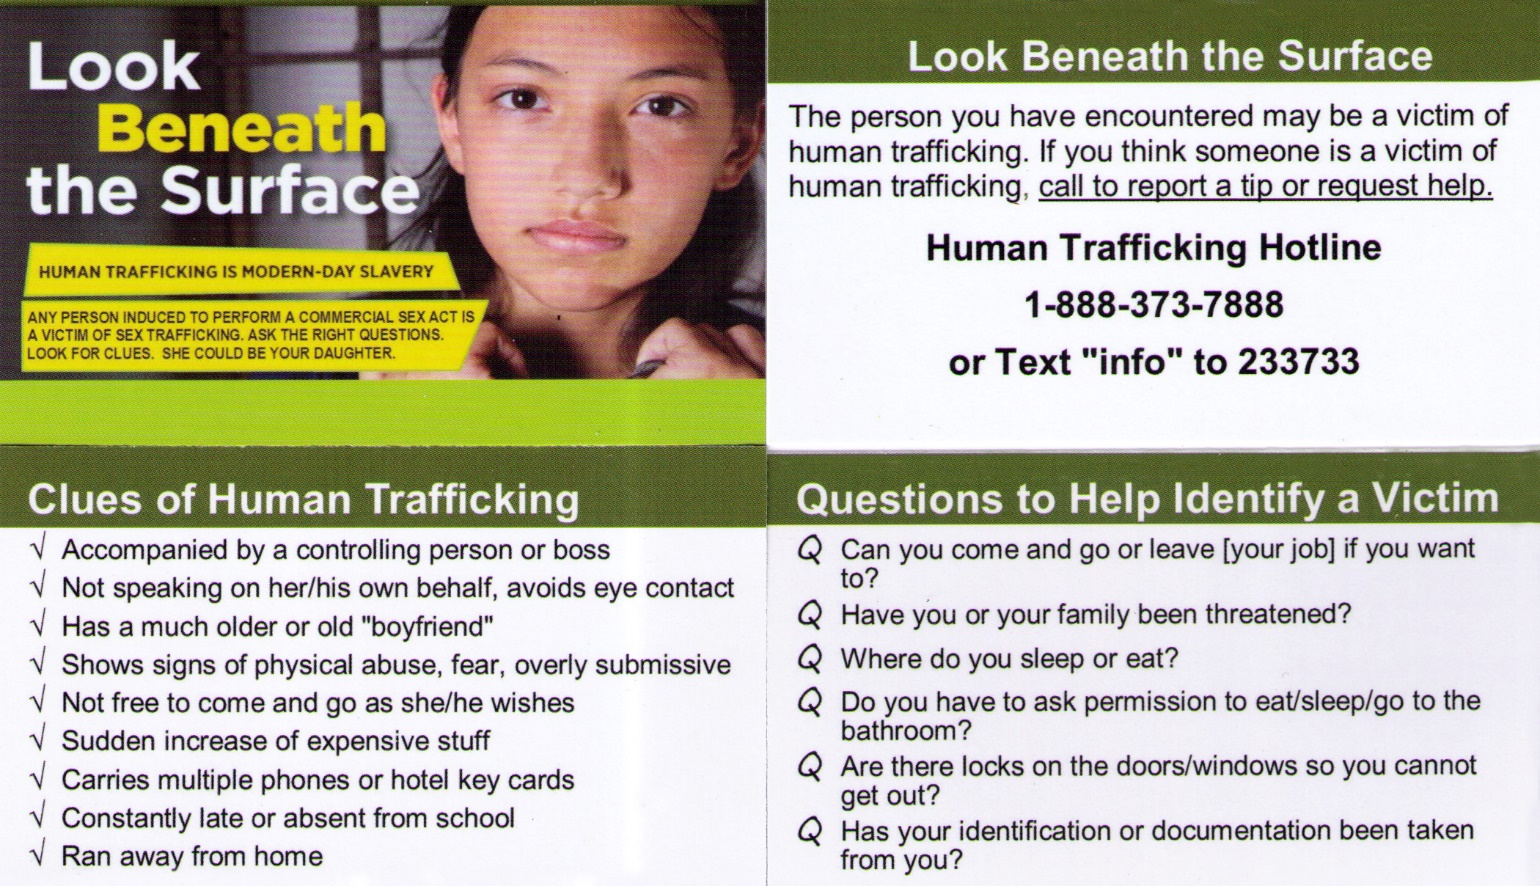 C:\Users\Schmit\Documents\Barb\Optimist\Newsletters\April 2019 articles\Trafficking-4.jpg